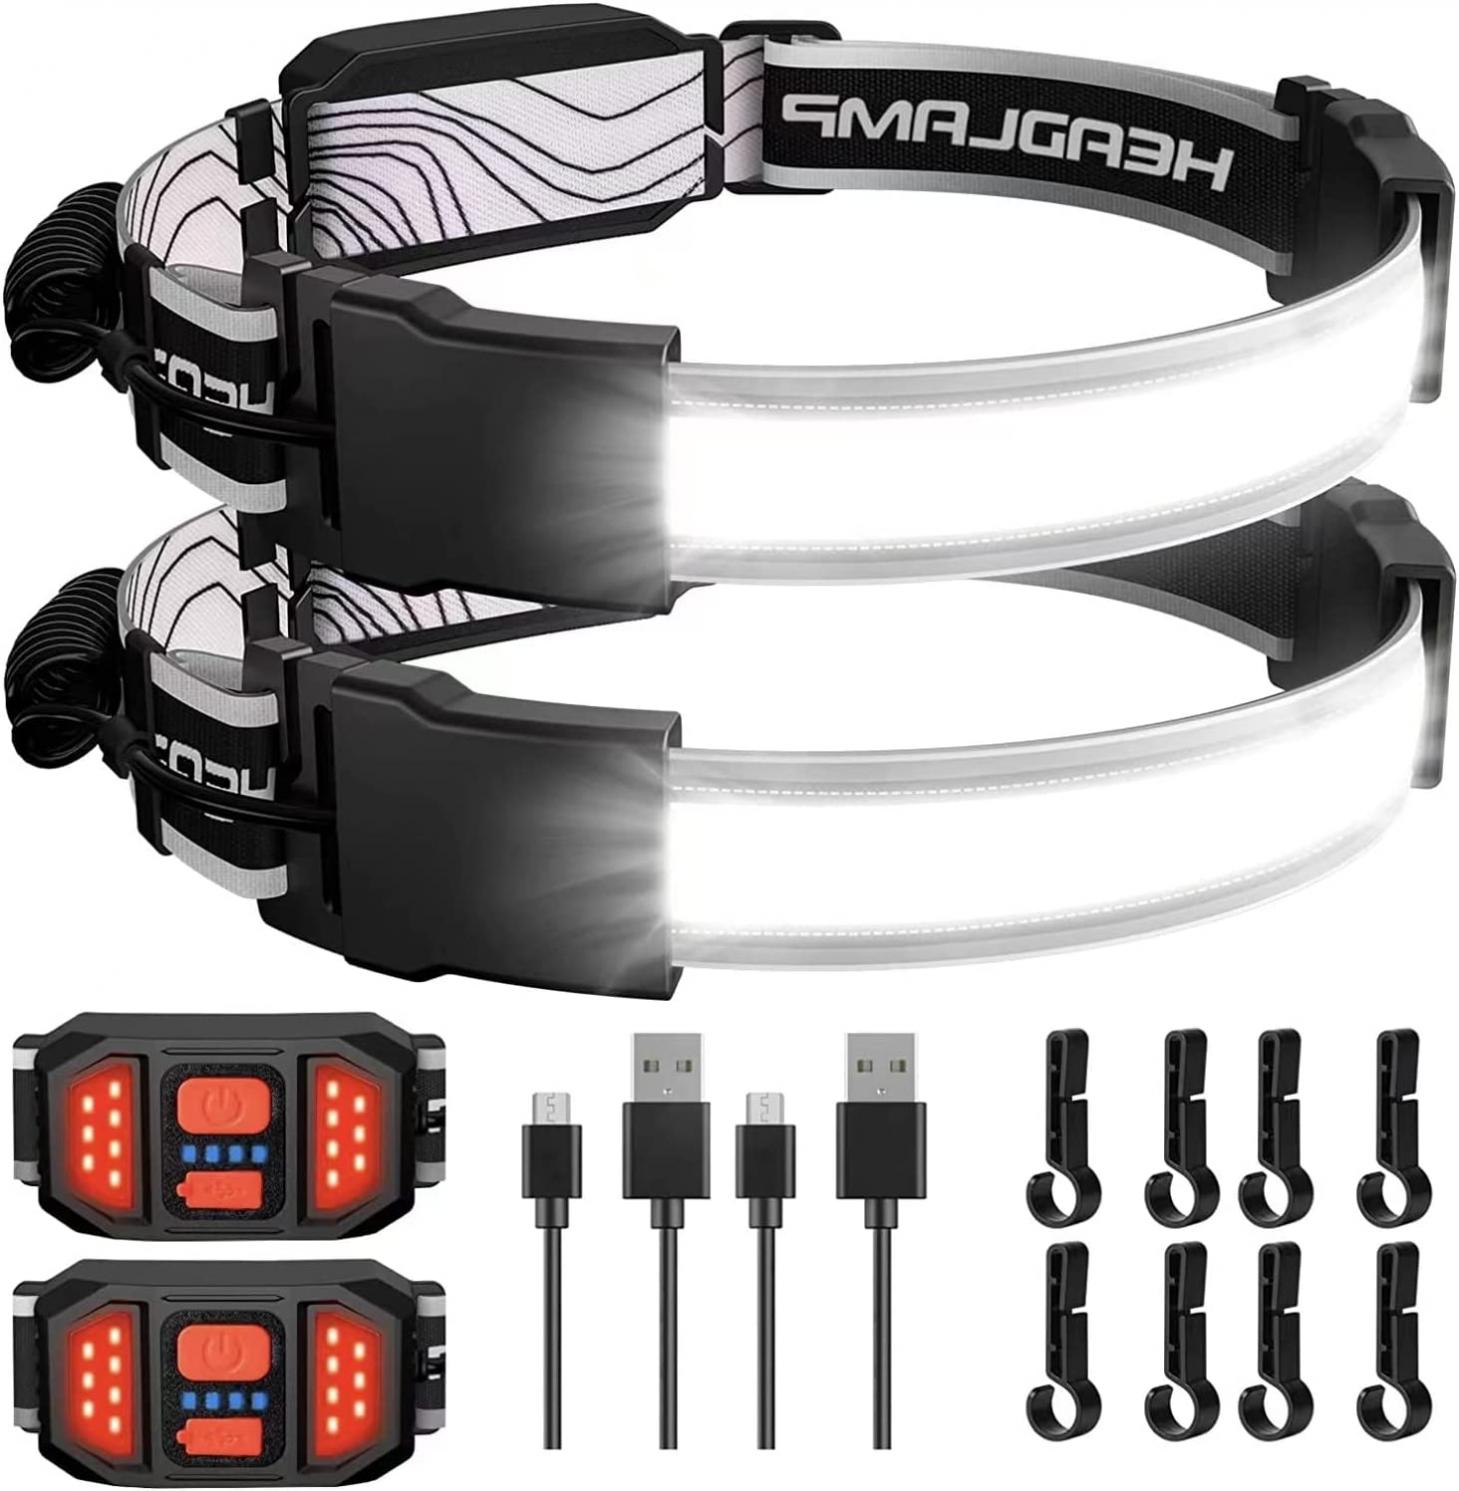 LED Headlamp Rechargeable, Svjestan 2-Packs 1000 Lumen Headlamp Flashlight, 230°Wide Beam LED Headlamps with Red Taillight, Lightweight Waterproof Head Lamp for Running Camping Hiking